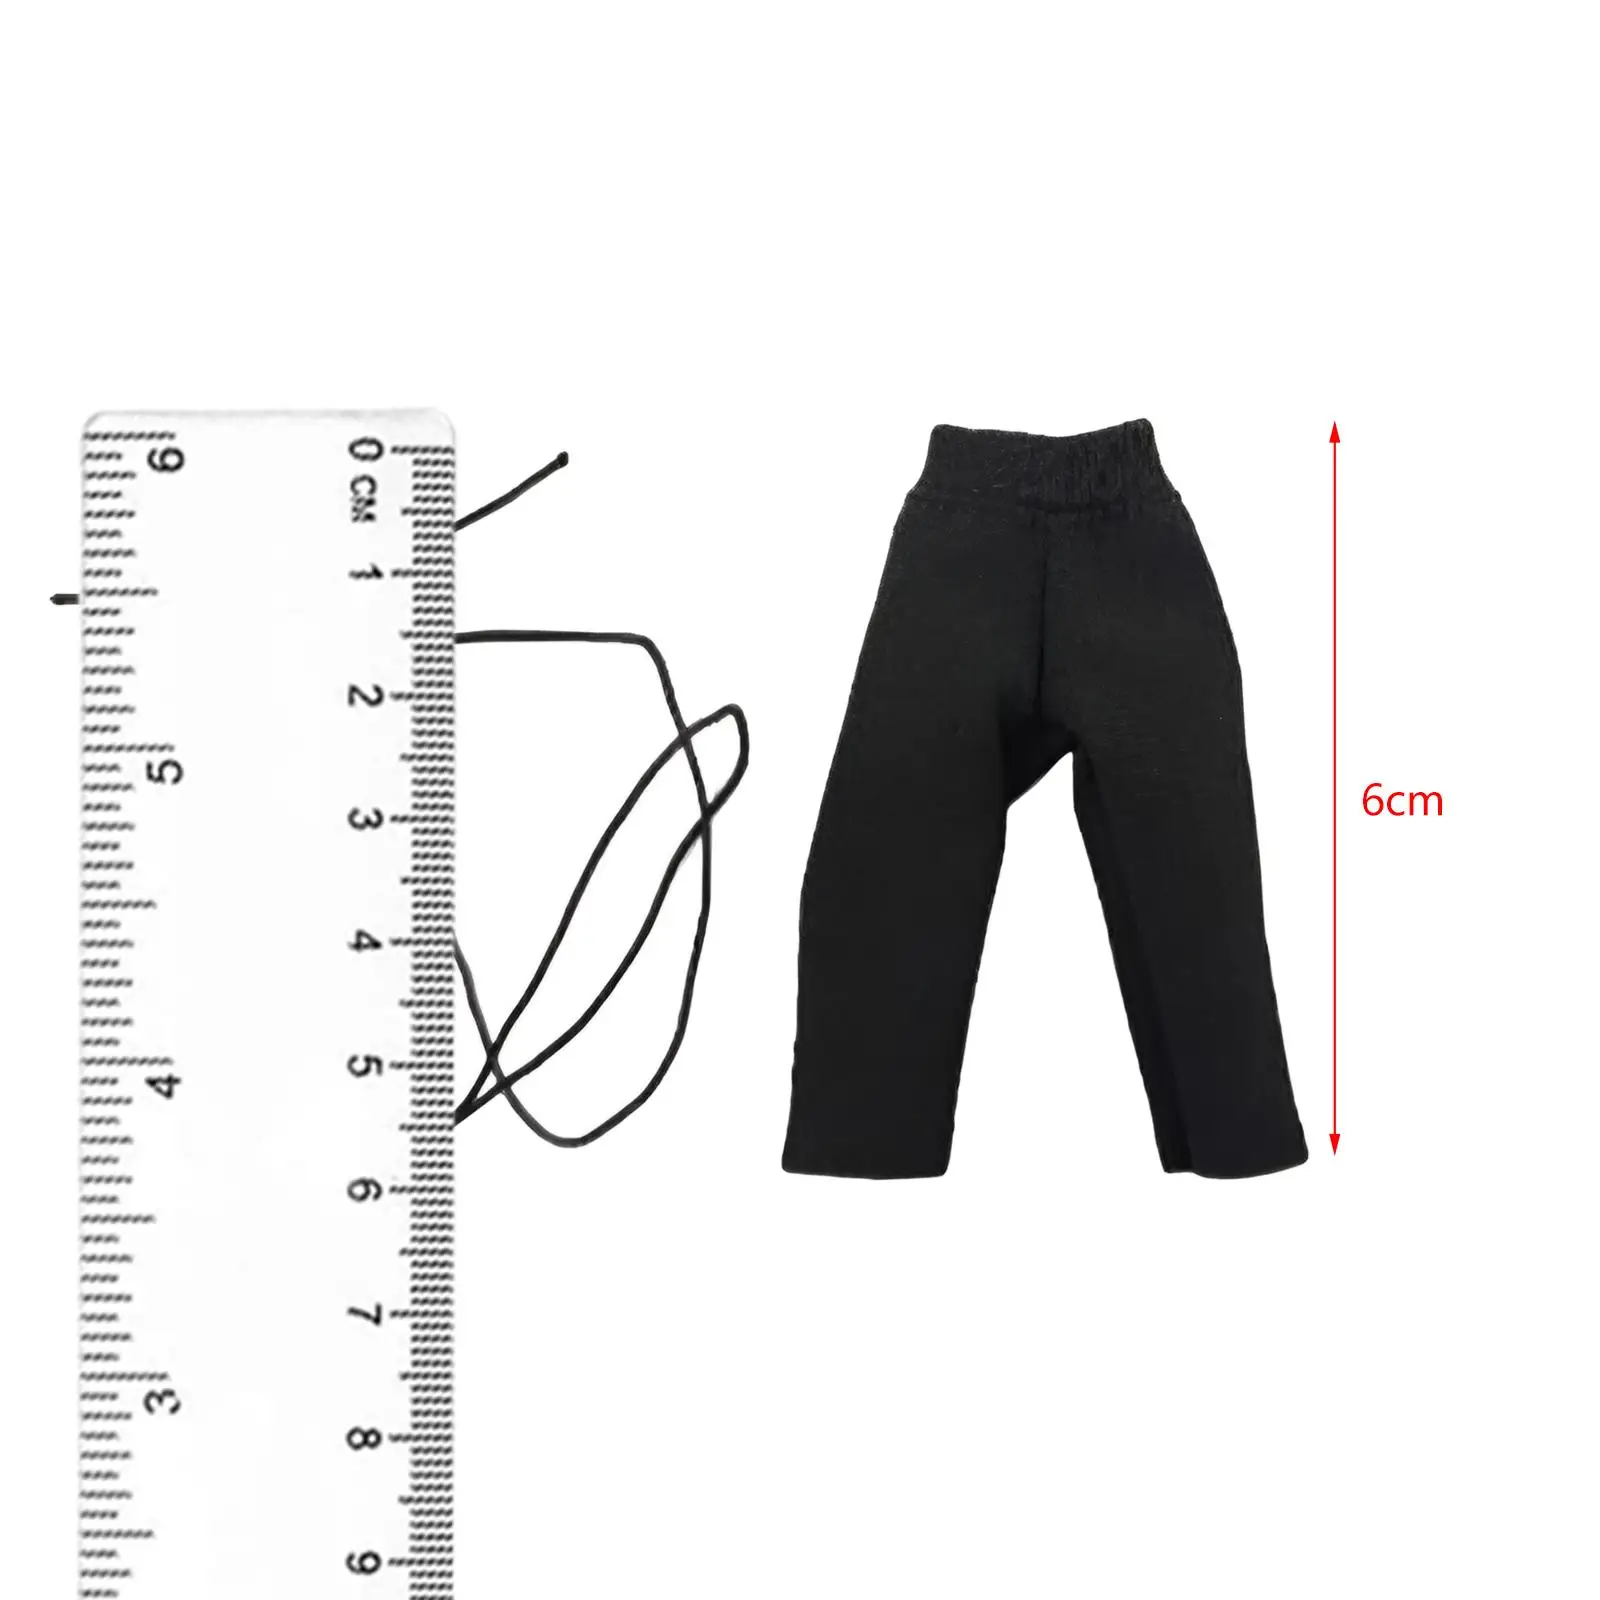 1:18 Scale Miniature Casual Trouser for 3.75`` Man Figures Accessory Costume